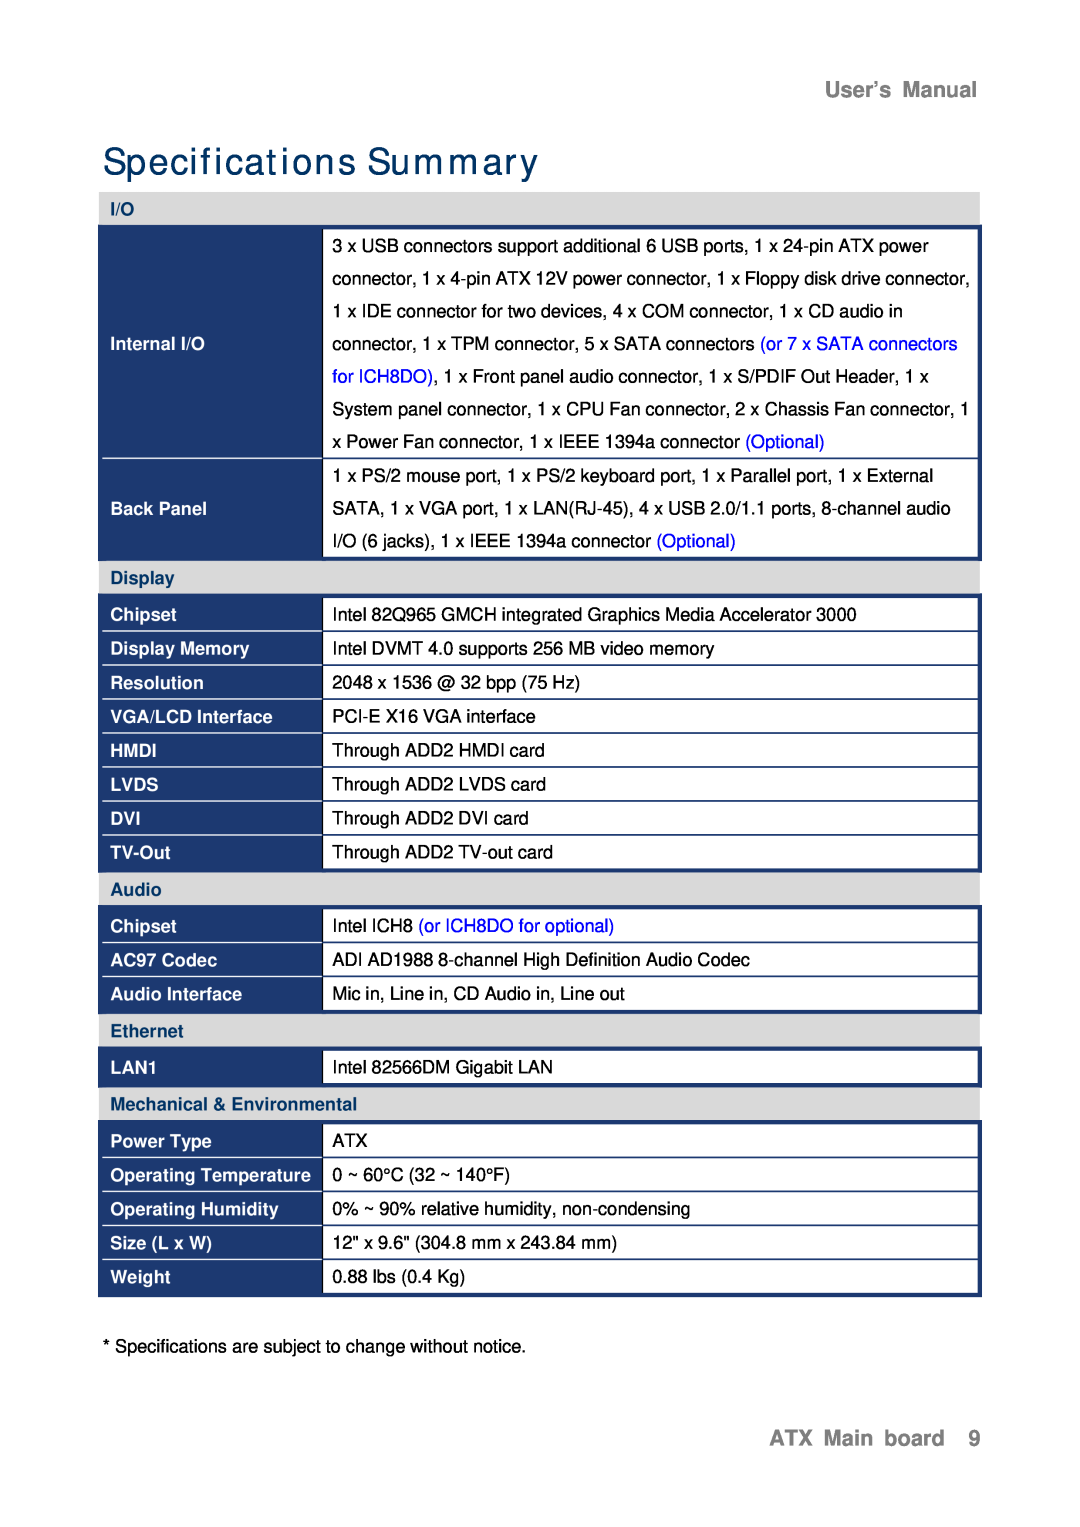 Intel AX965Q Specifications Summary, User’s Manual, ATX Main board, Display, Audio, Intel ICH8 or ICH8DO for optional 